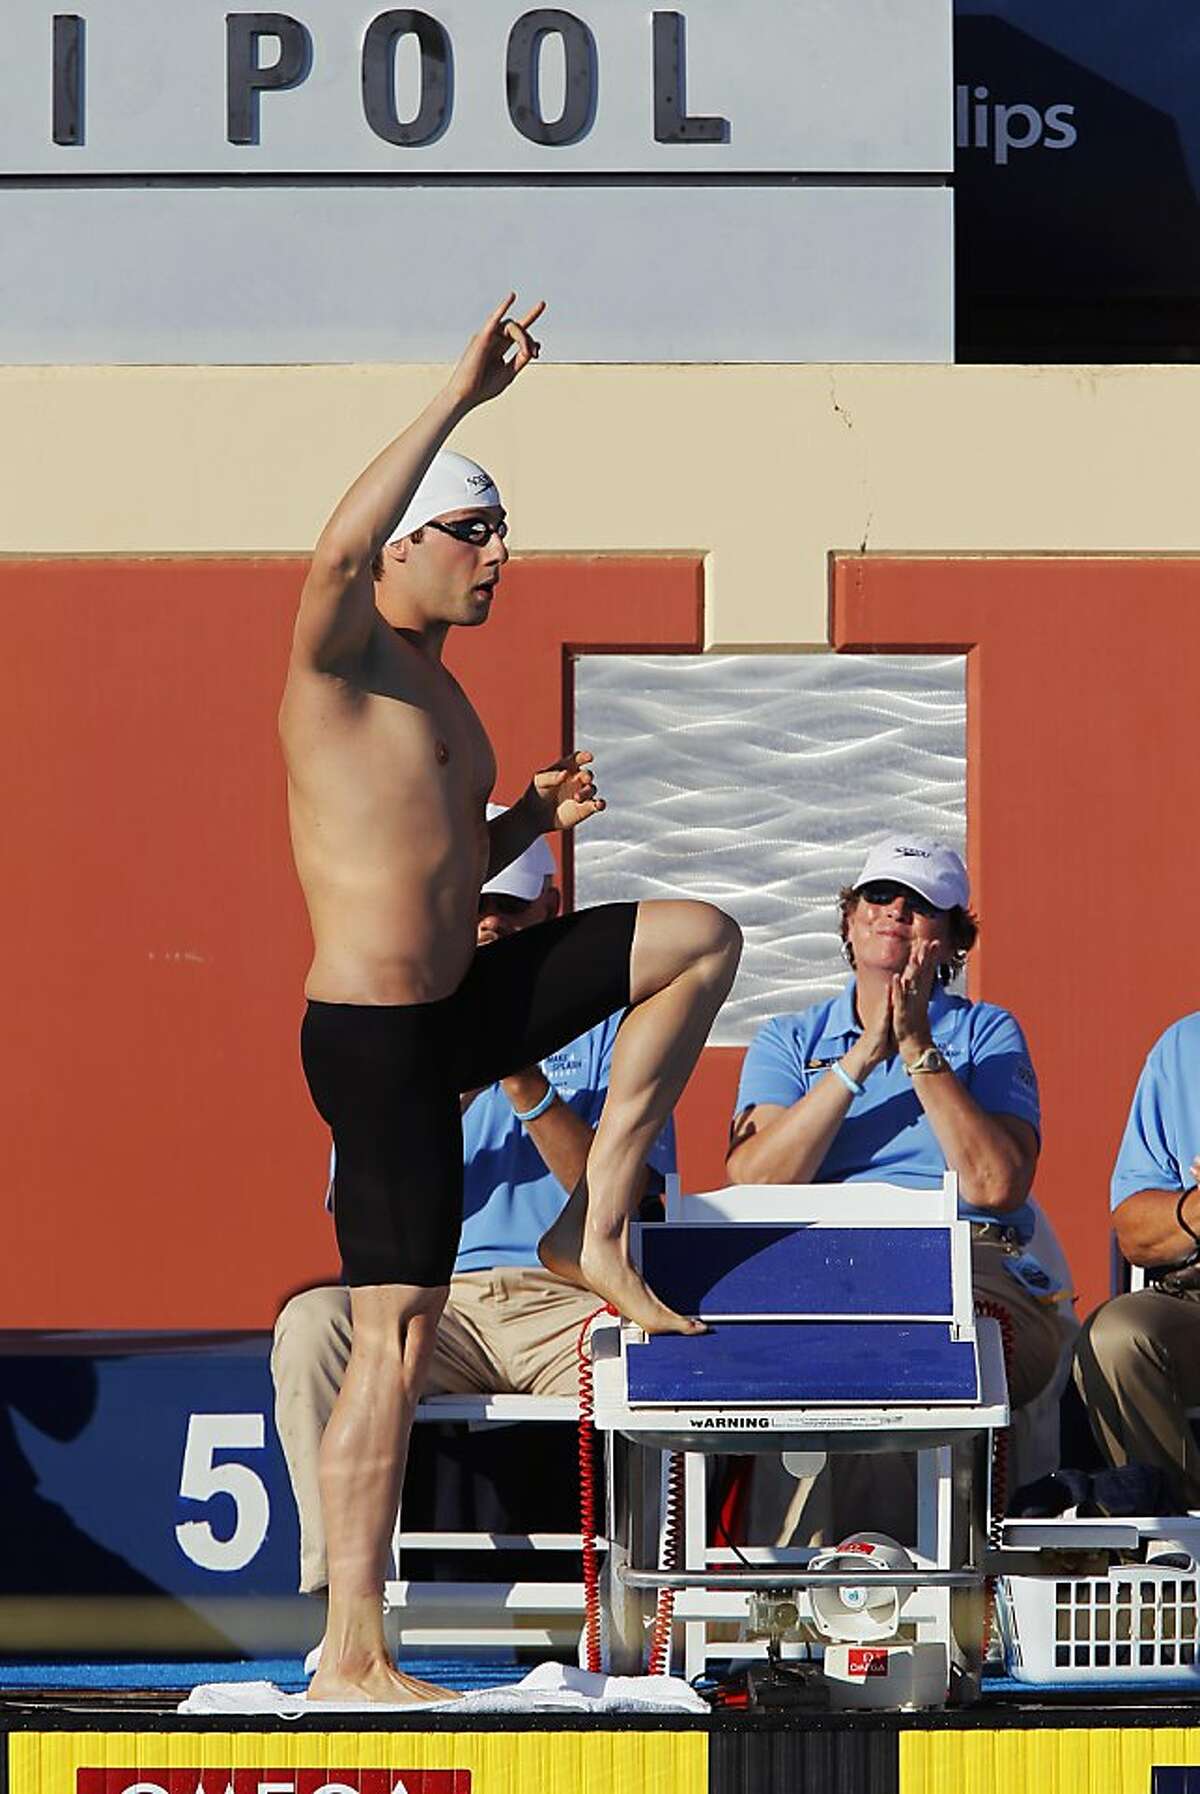 Garrett Weber-Gale steps onto the block enroute to a win in the men's 100 meter freestyle in nationals at Stanford University's Avery Aquatic Center on August 5, 2011 in Palo Alto, California.